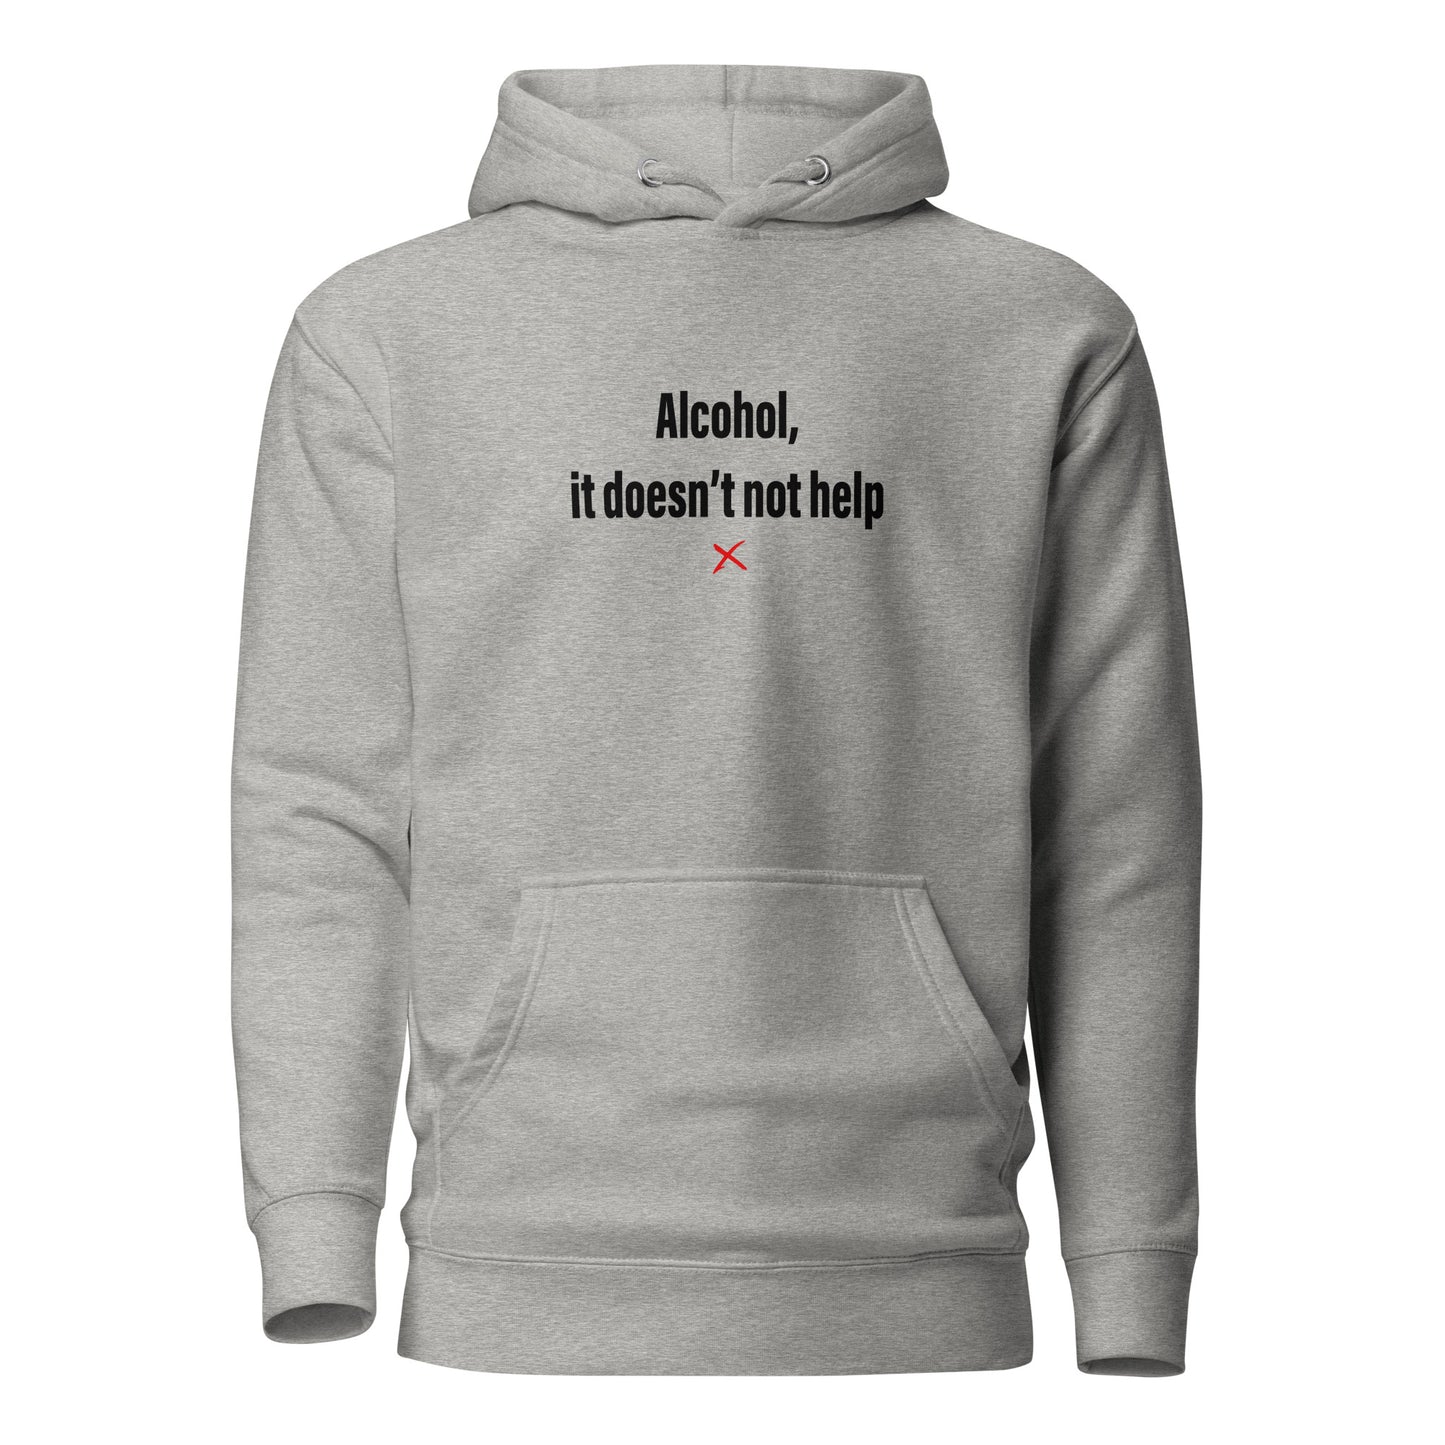 Alcohol, it doesn't not help - Hoodie